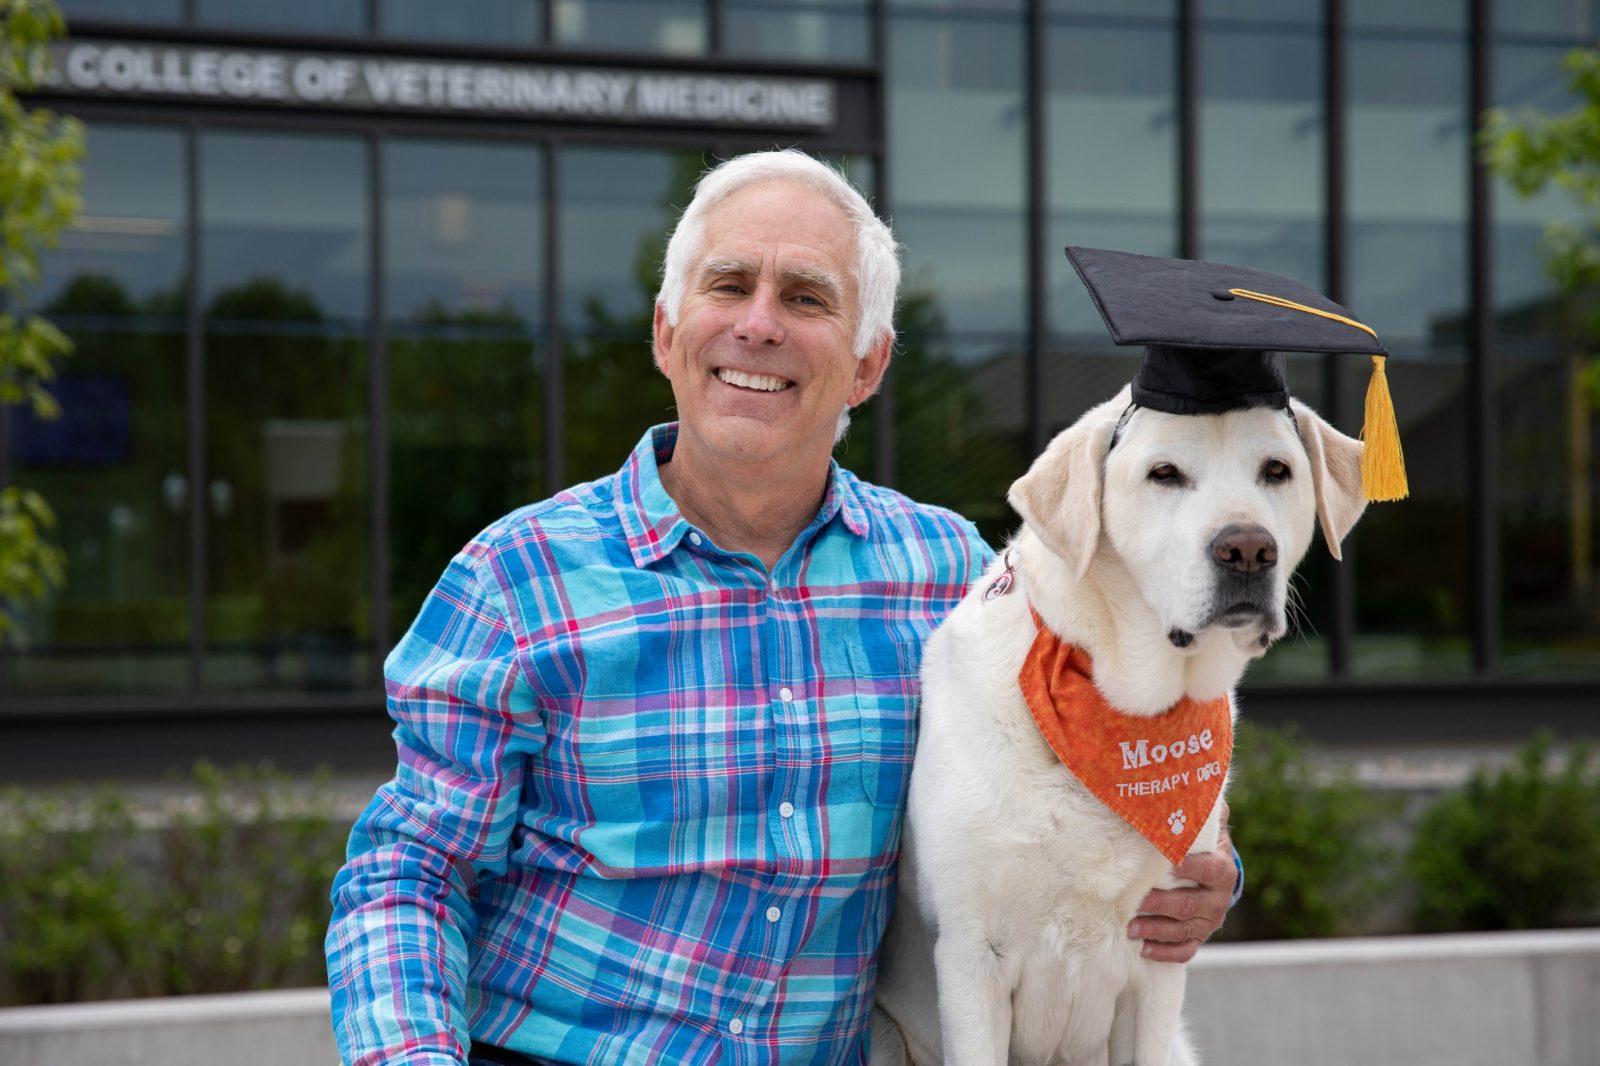 Moose, a yellow lab and therapy dog wearing a graduation cap, poses with owner/handler Trent Davis.